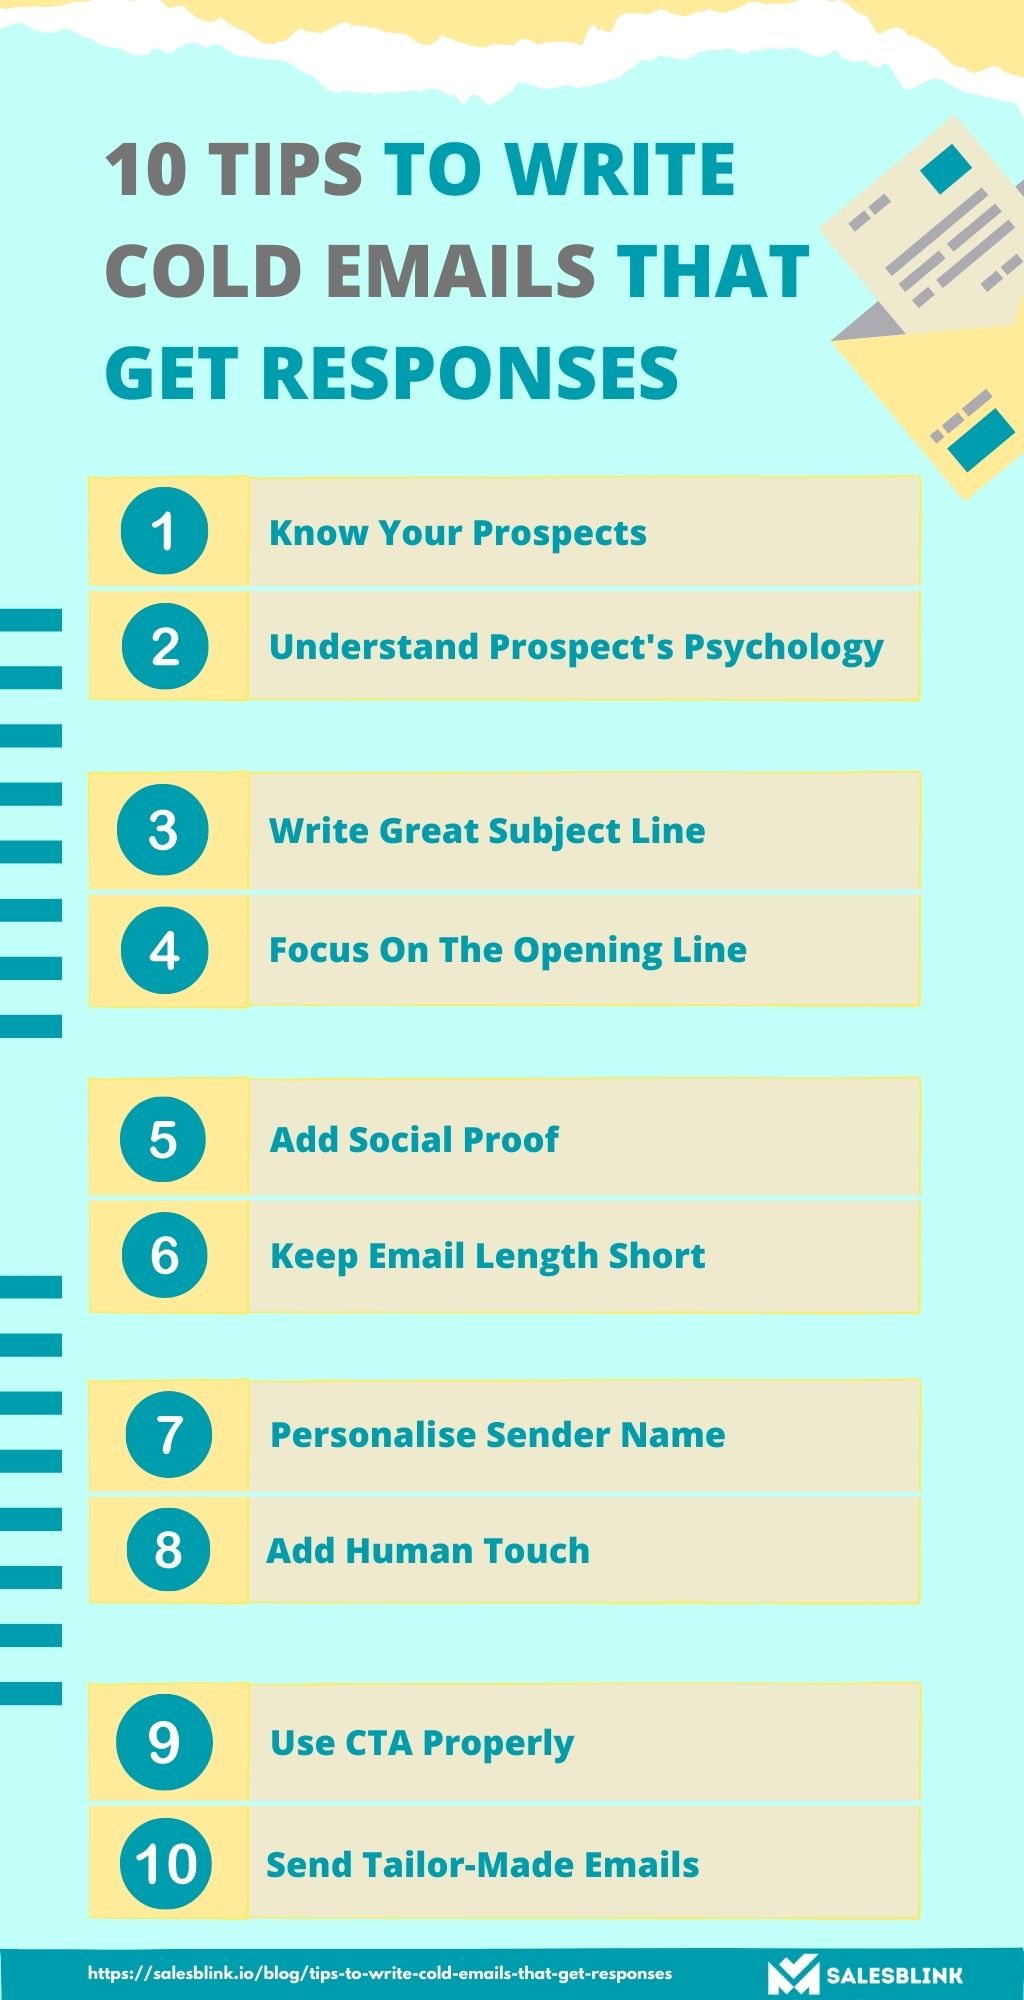 10 Tips To Write Cold Emails That Get Responses